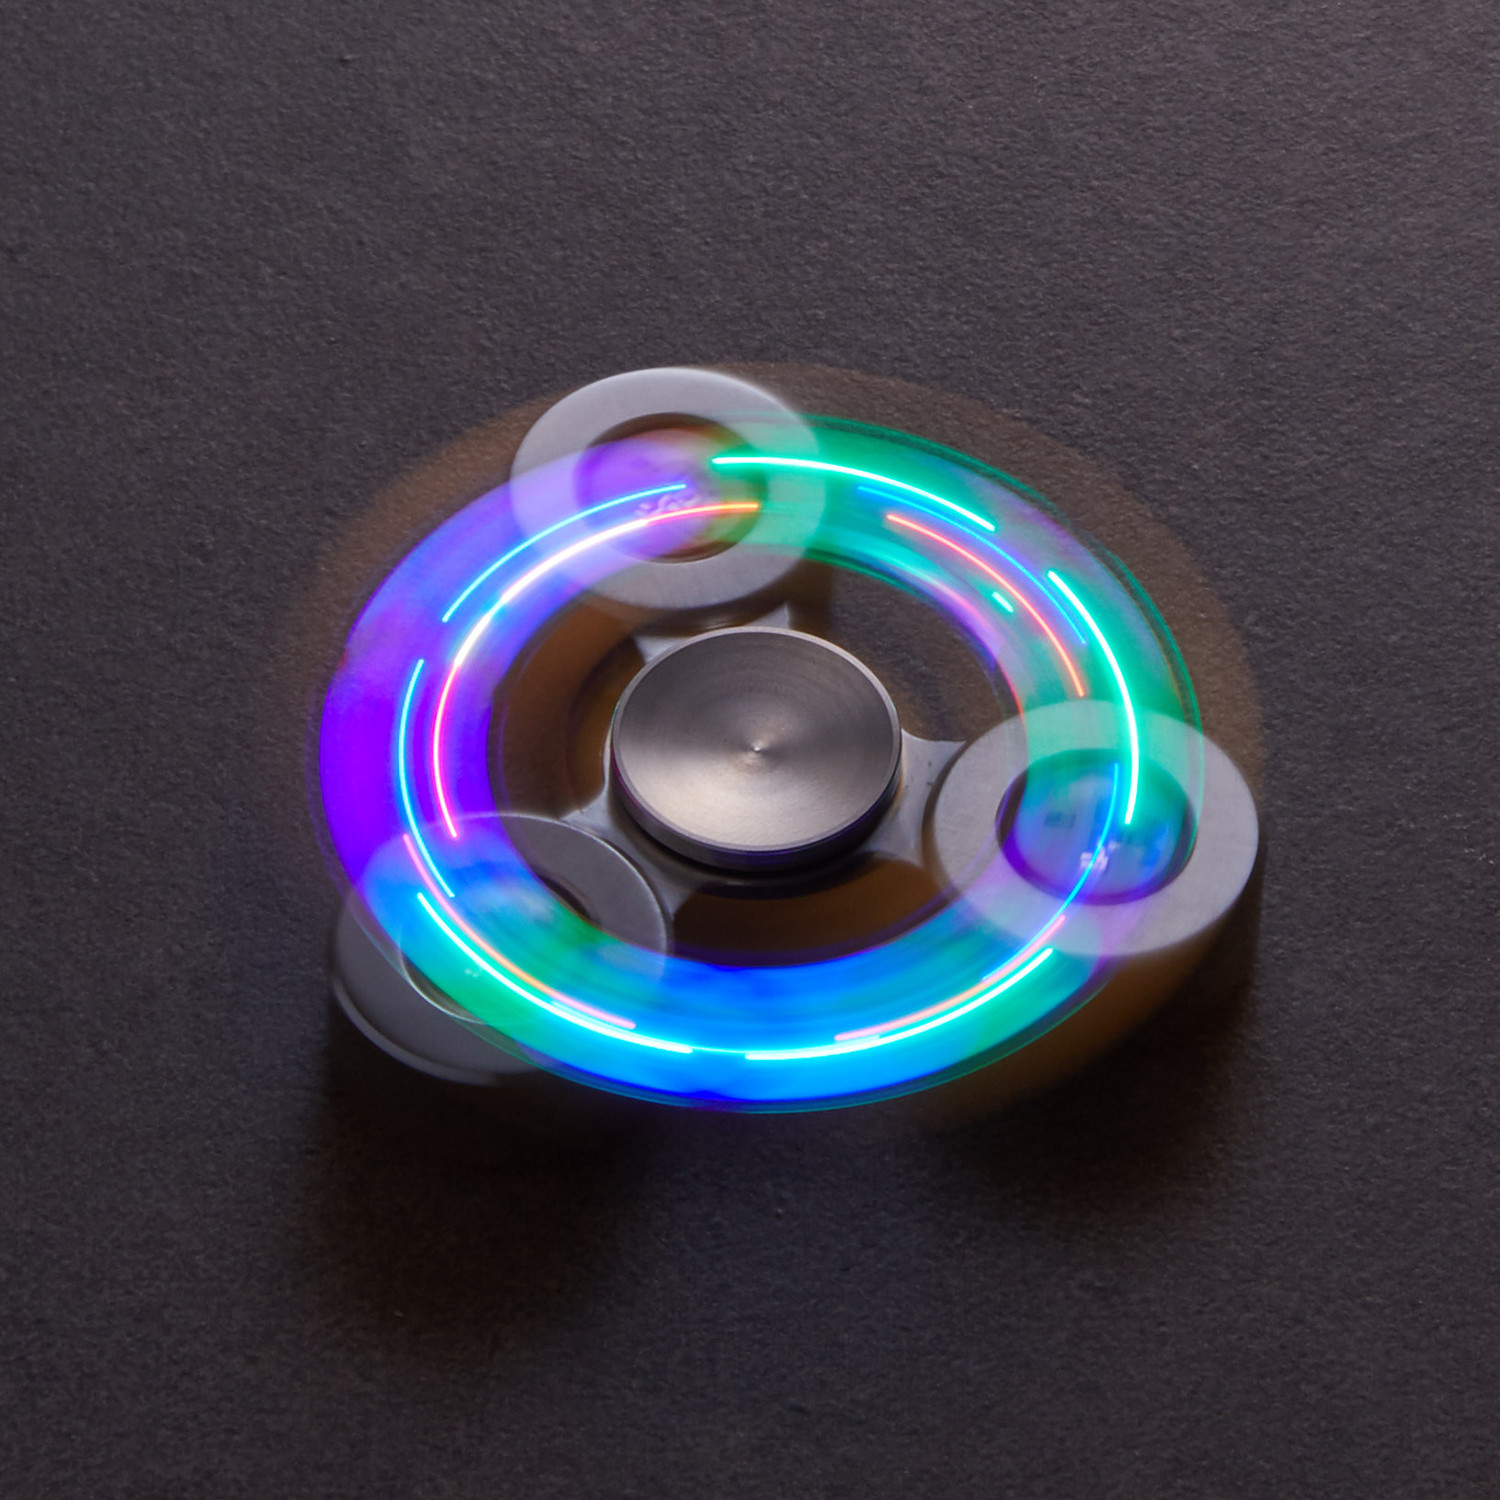 Antzy Top The Stainless Steel Fidget Spinner on The Market 